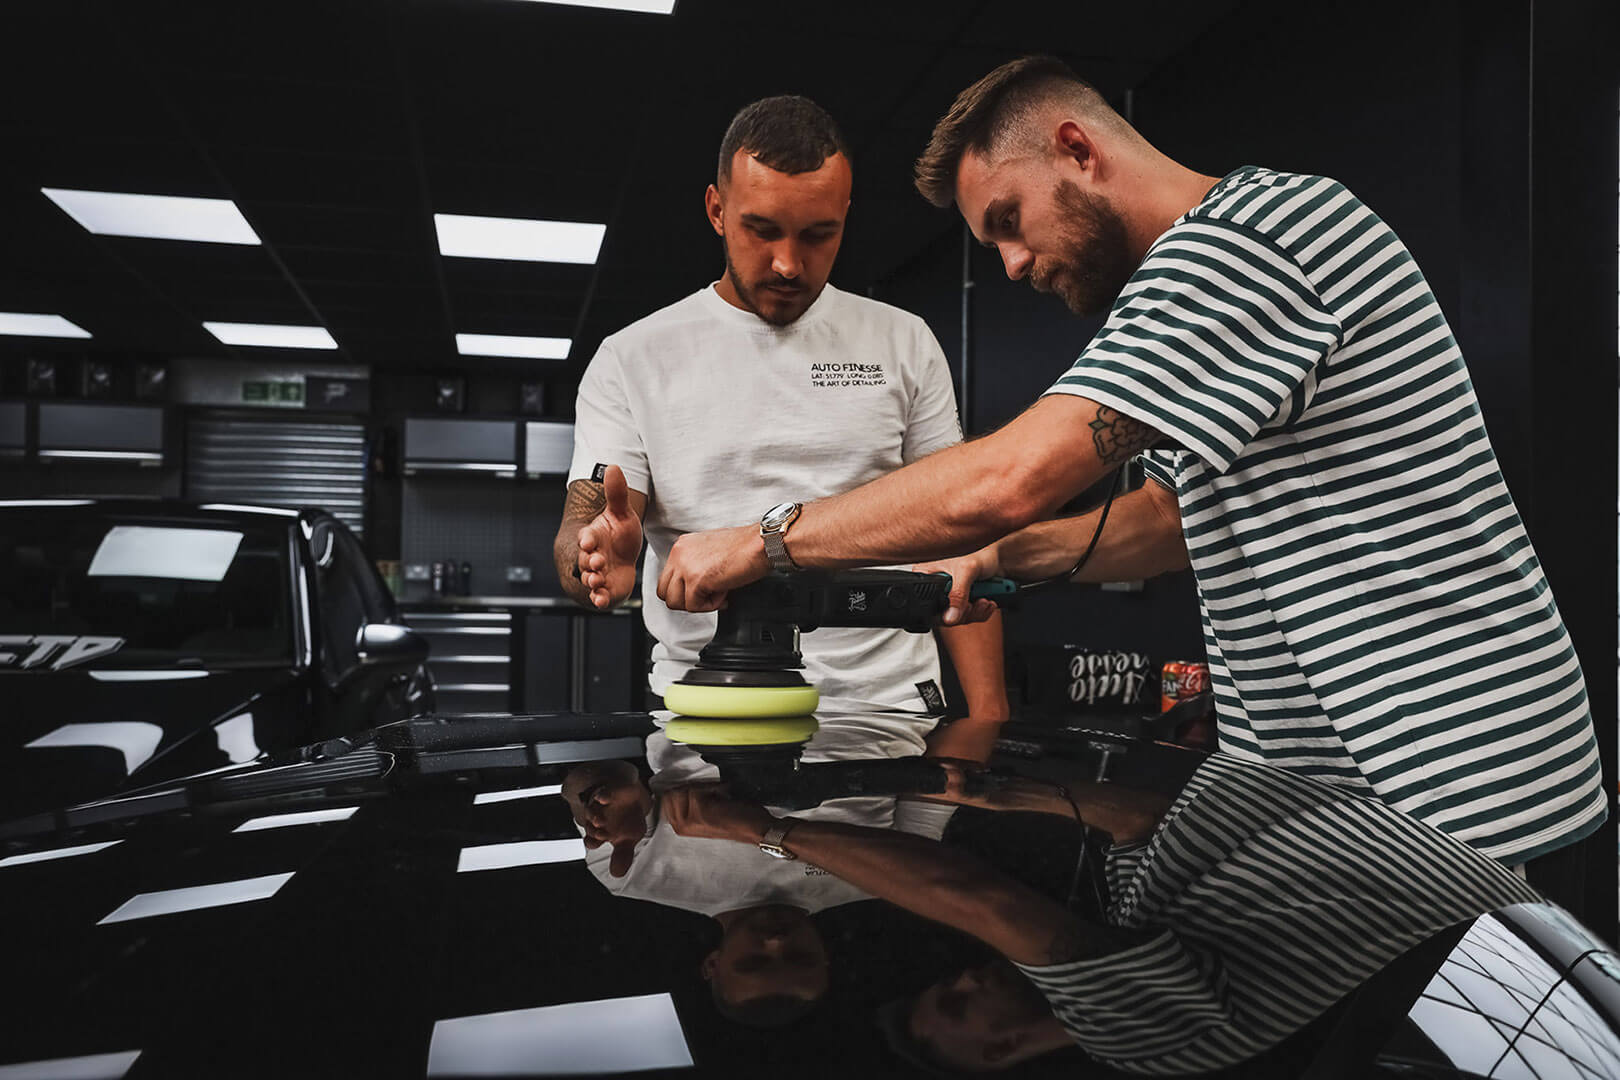 Auto Finesse | The Detailing Academy Serving The needs of the Enthusiast &amp; Pro Detailer Alike